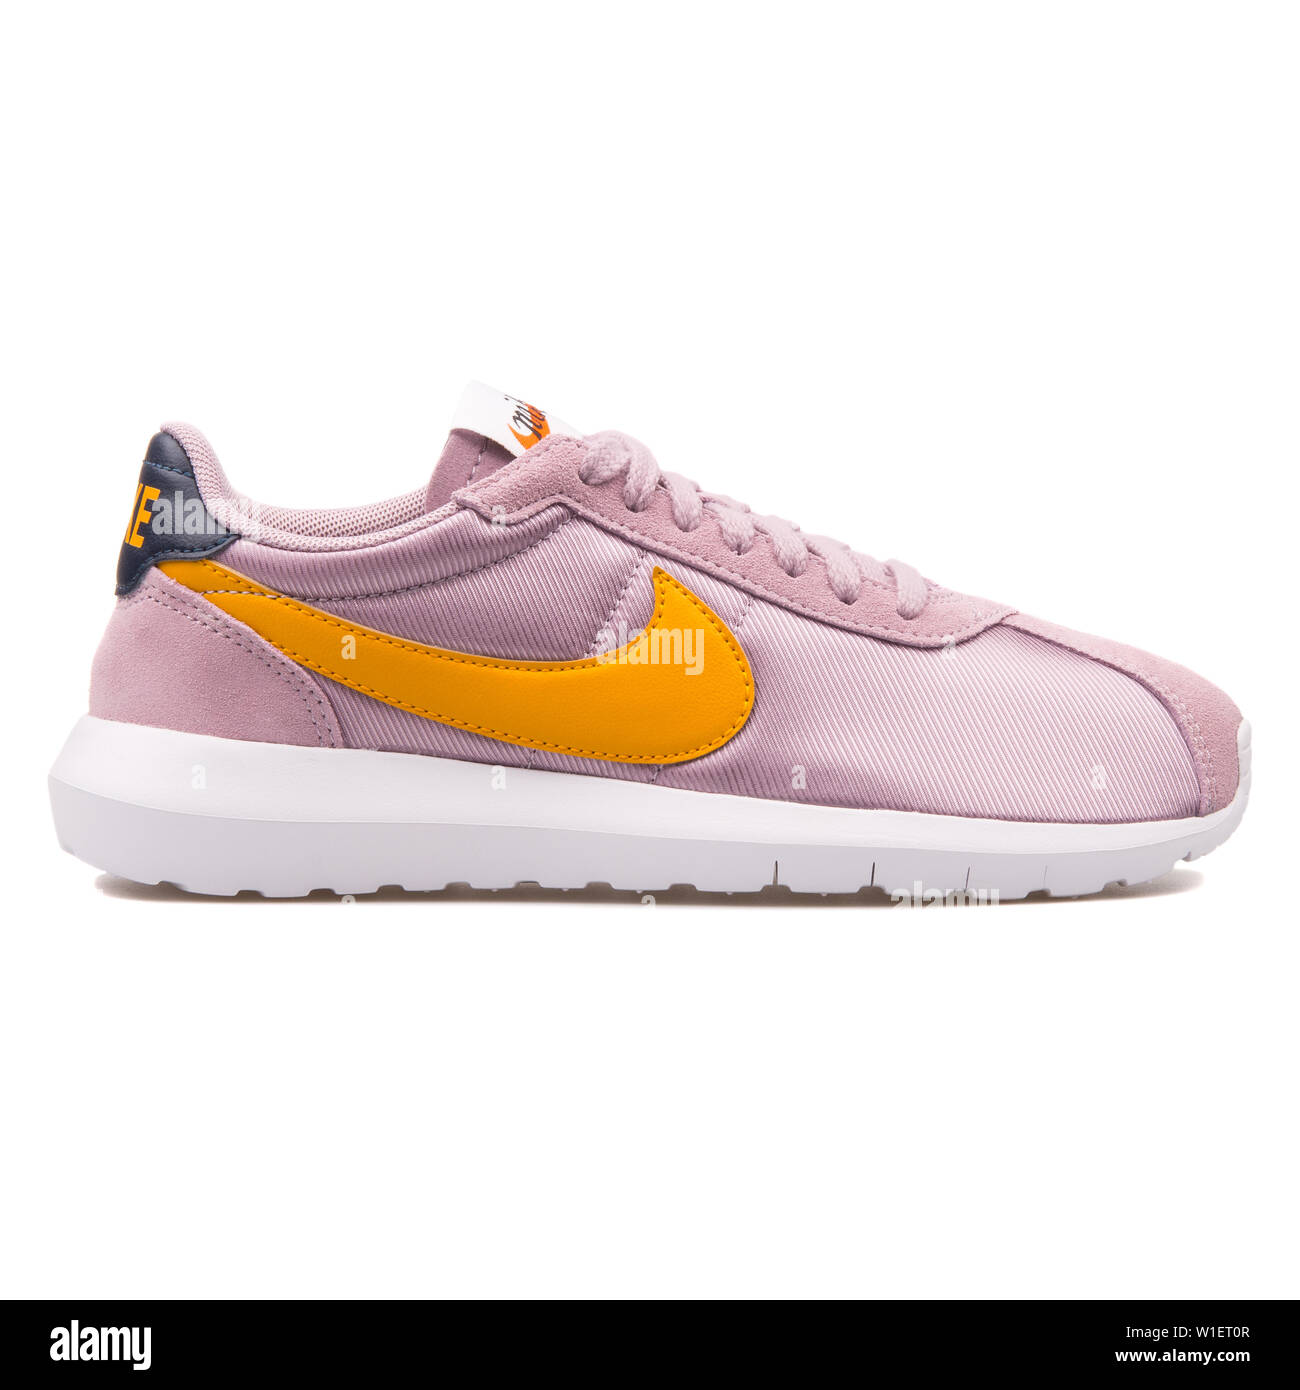 VIENNA, AUSTRIA - AUGUST 10, 2017: Nike Roshe LD 1000 rose and gold sneaker  on white background Stock Photo - Alamy